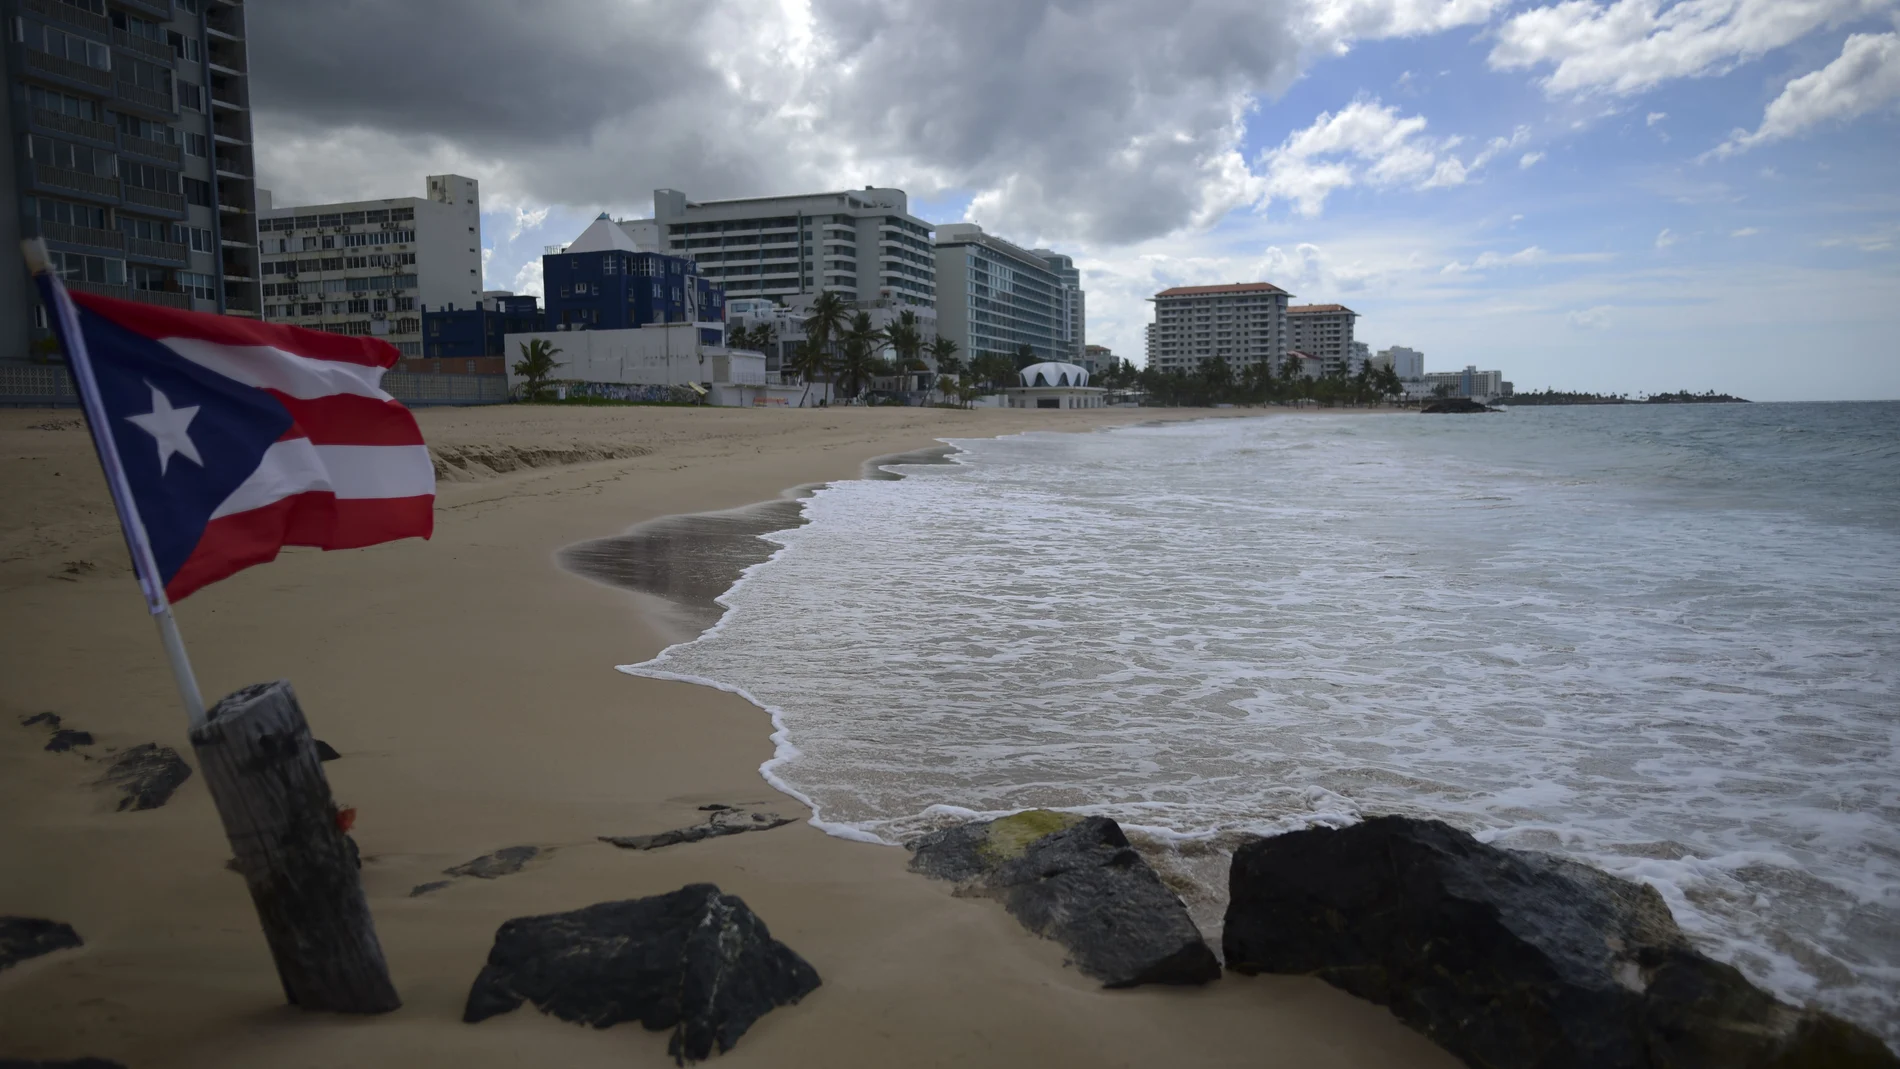 A Puerto Rican flag flies on an empty beach at Ocean Park, in San Juan, Puerto Rico, Thursday, May 21, 2020. Puerto Rico is cautiously reopening beaches, restaurants, churches, malls, and hair salons under strict conditions as the U.S. territory emerges from a two-month lockdown despite dozens of new coronavirus cases reported daily. (AP Photo/Carlos Giusti) PUERTO RICO OUT-NO PUBLICAR EN PUERTO RICO